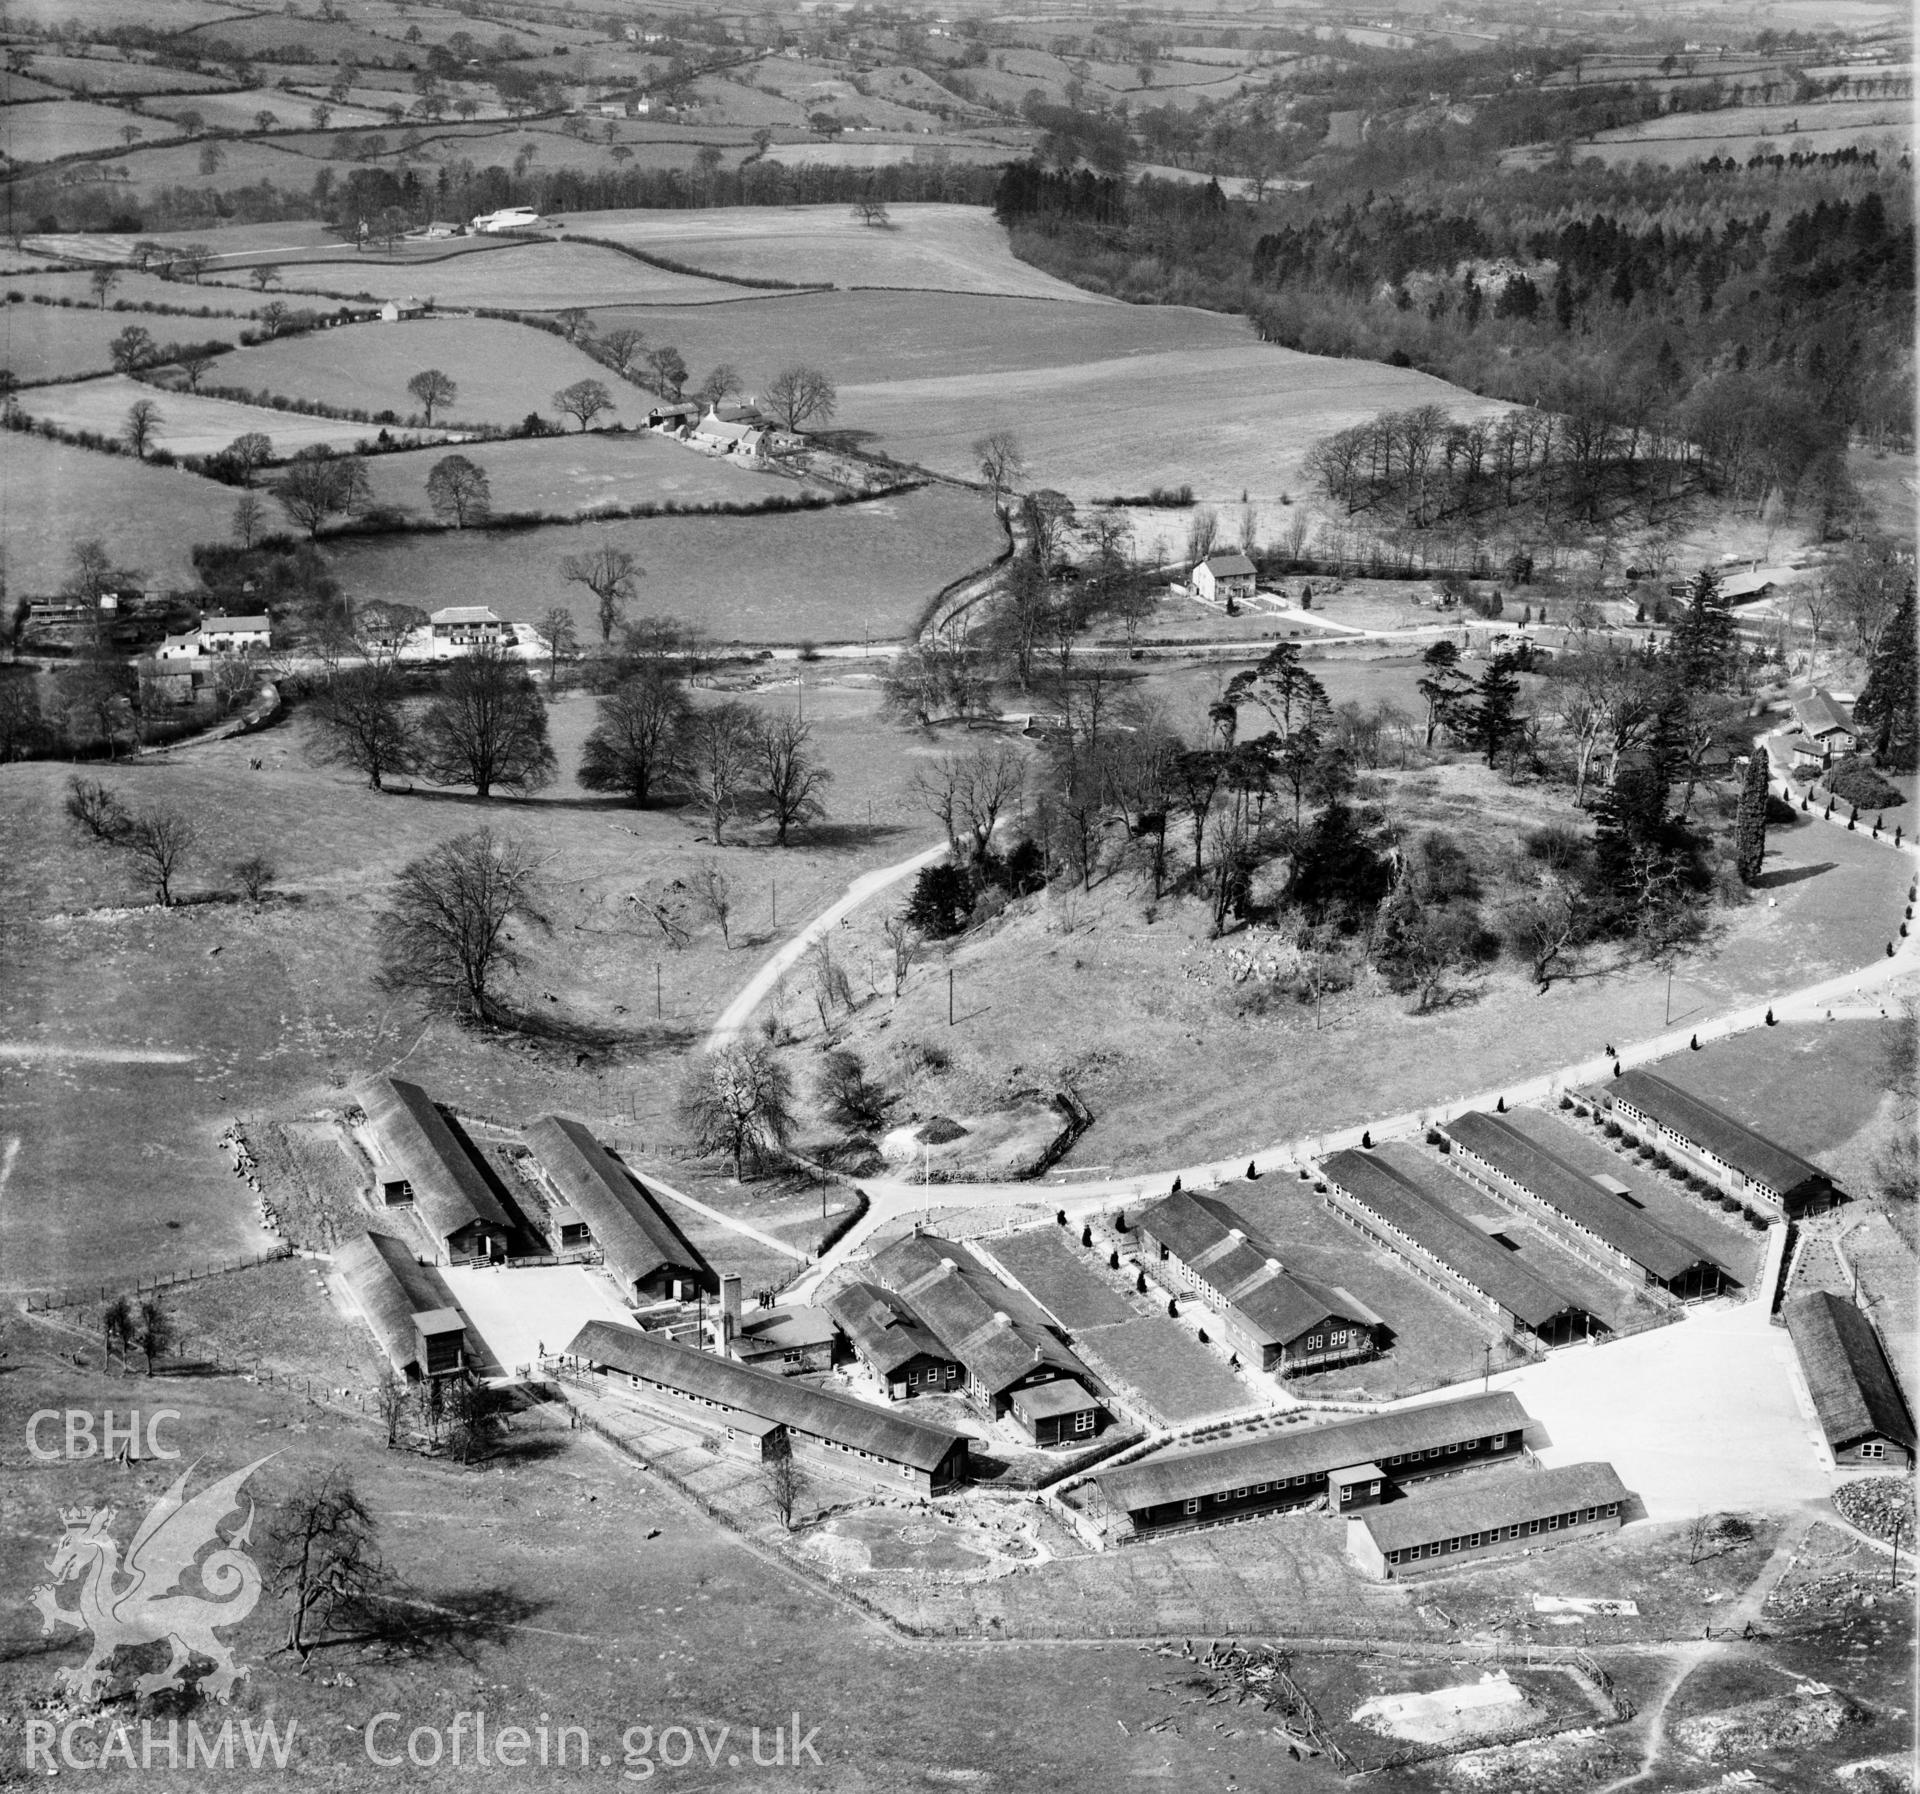 View of Colomendy Camp commissioned by J. Gerrard & Sons Ltd. Swinton, titled: 'Manchester Holiday Camp'. Oblique aerial photograph, 5?" cut roll film.